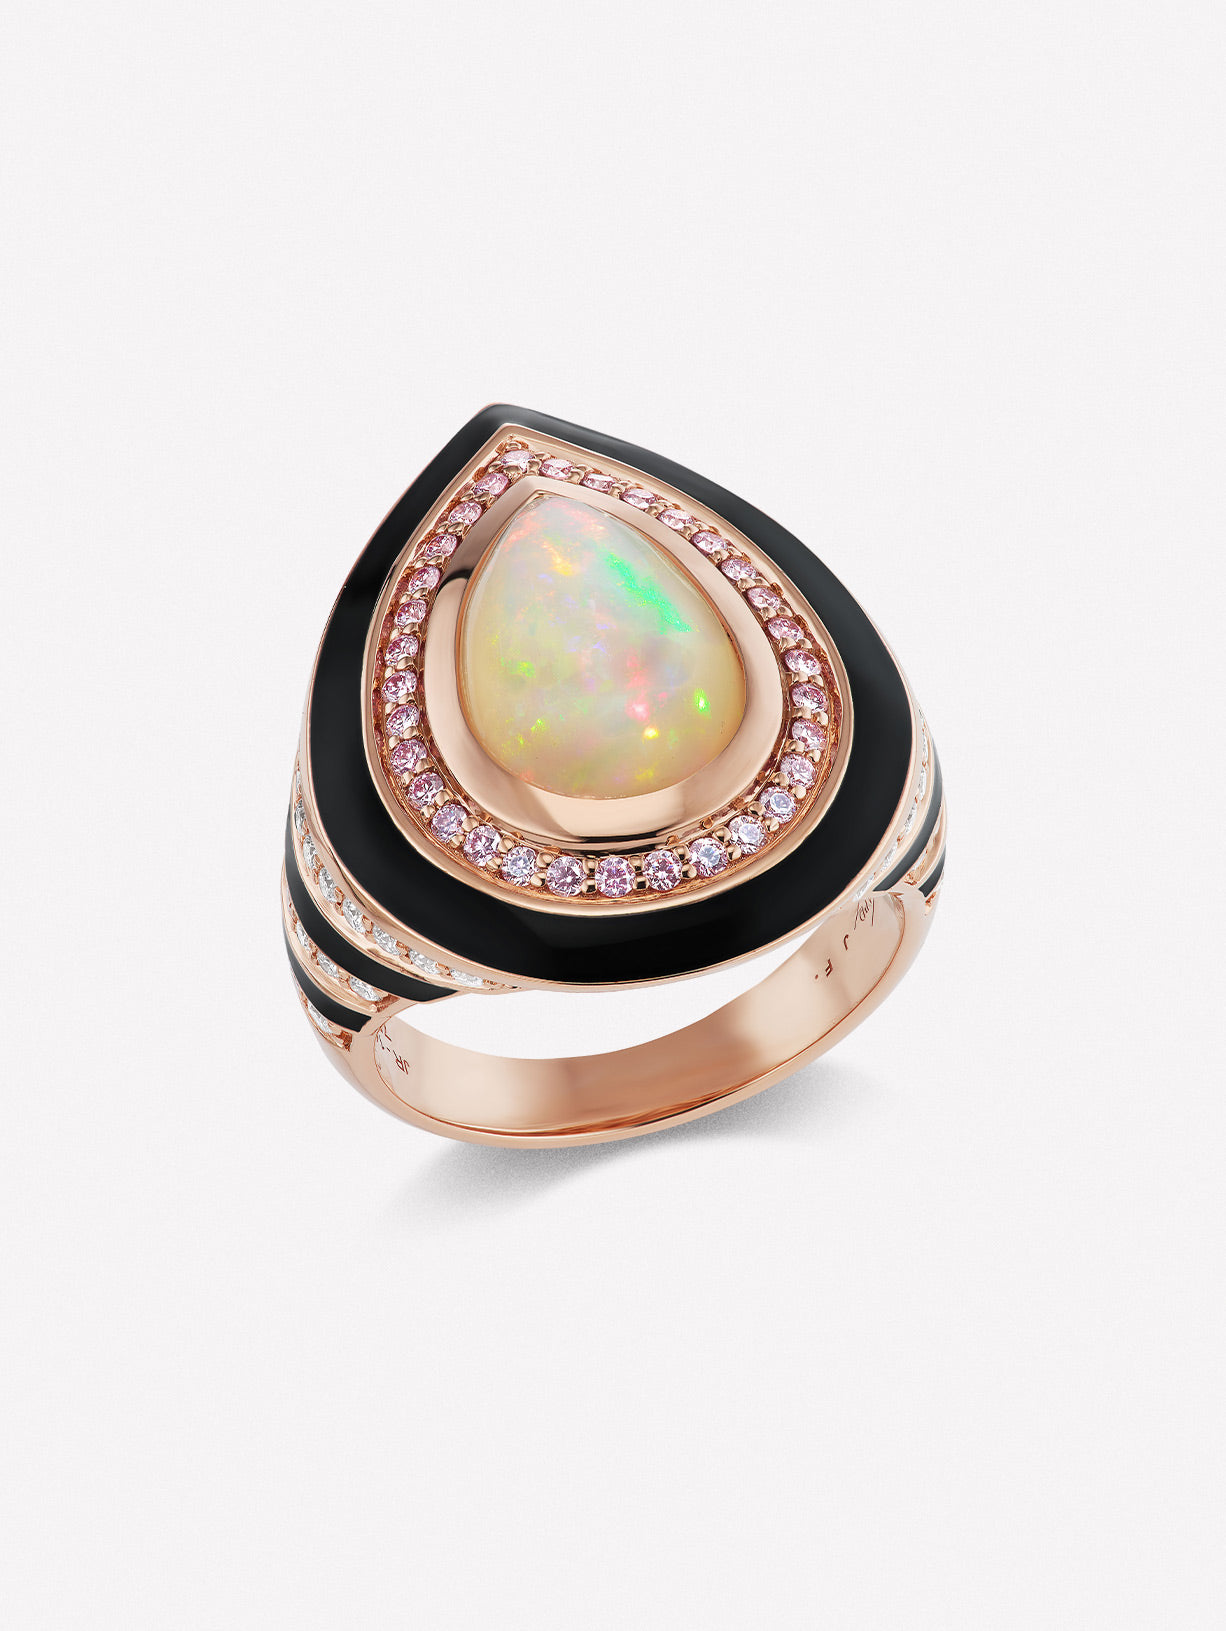 Argyle Pink™ Diamond and White Opal Ring - Pink Diamonds, J FINE - J Fine, ring - Pink Diamond Jewelry, argyle-pink™-diamond-and-white-opal-ring-by-j-fine-1 - Argyle Pink Diamonds